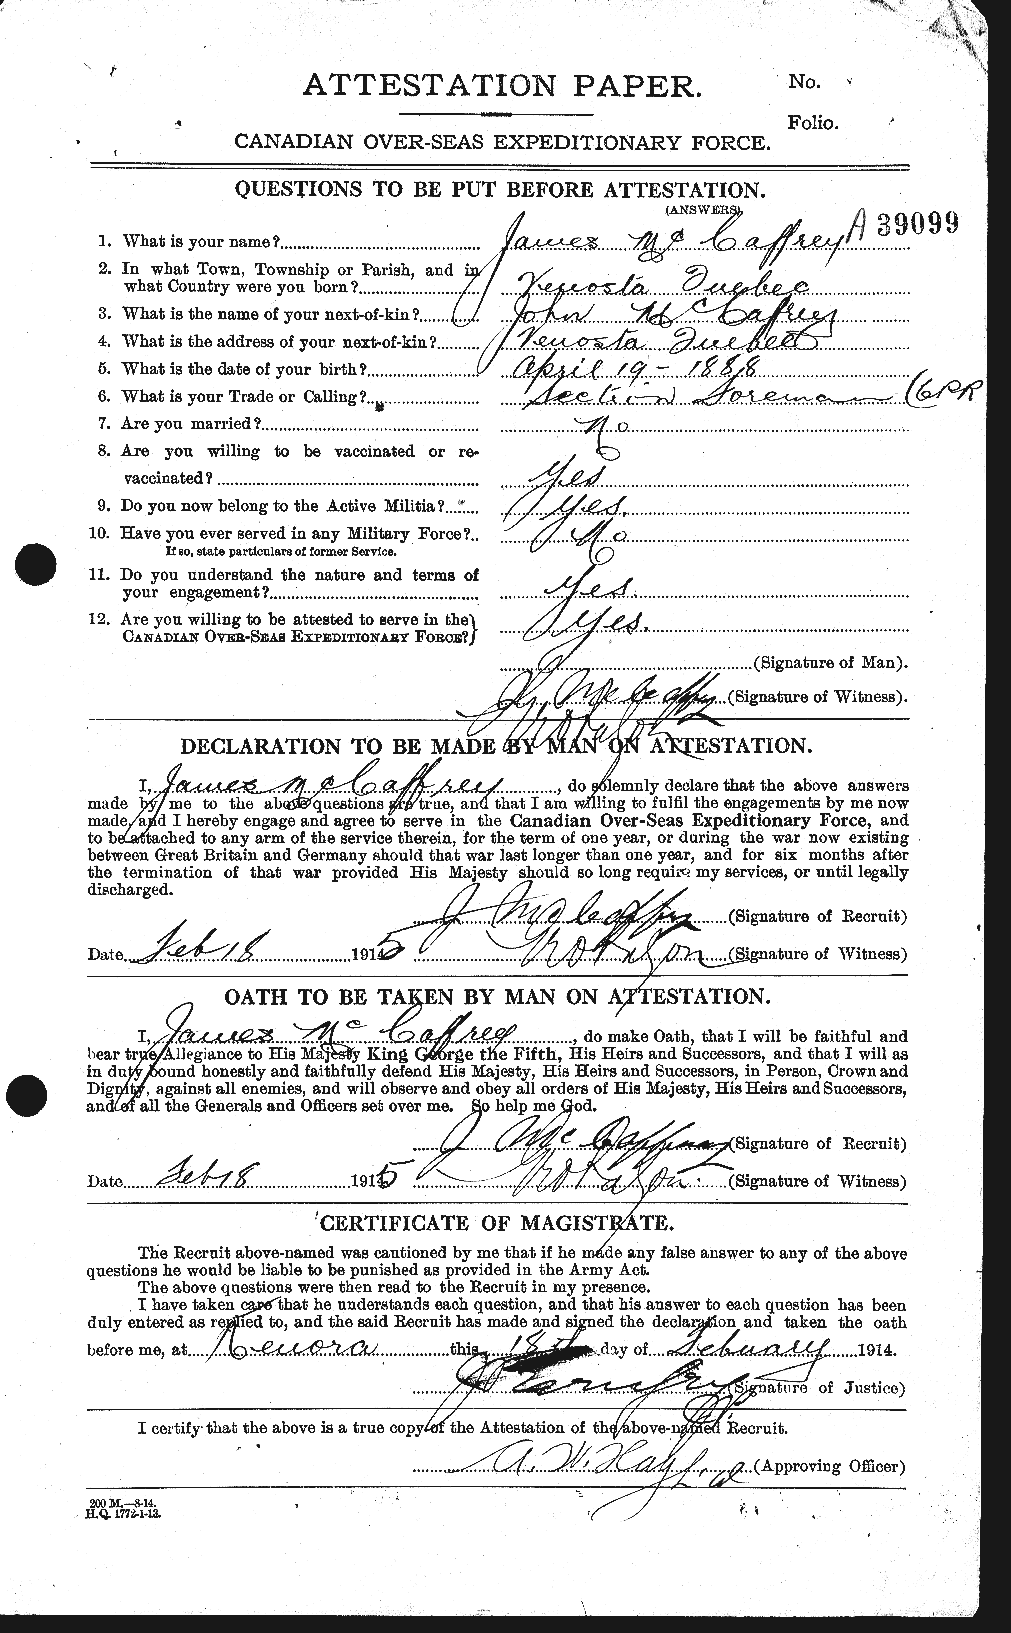 Personnel Records of the First World War - CEF 130916a